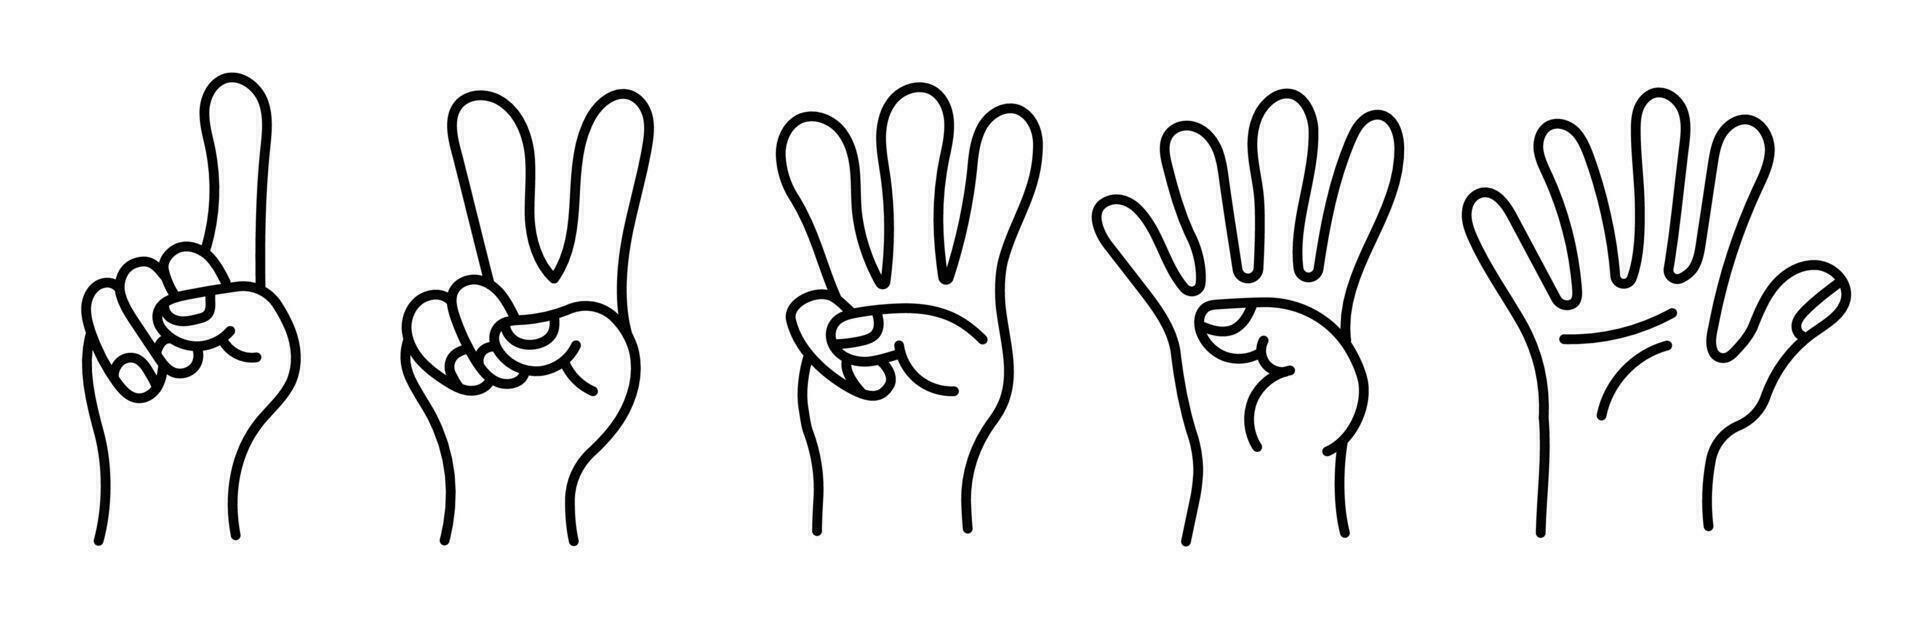 Collection of gesture signs from human hands. A set of fingers showing emotions. line gesture finger design elements. communication expressions with hand sign in doodle style. vector editable stroke